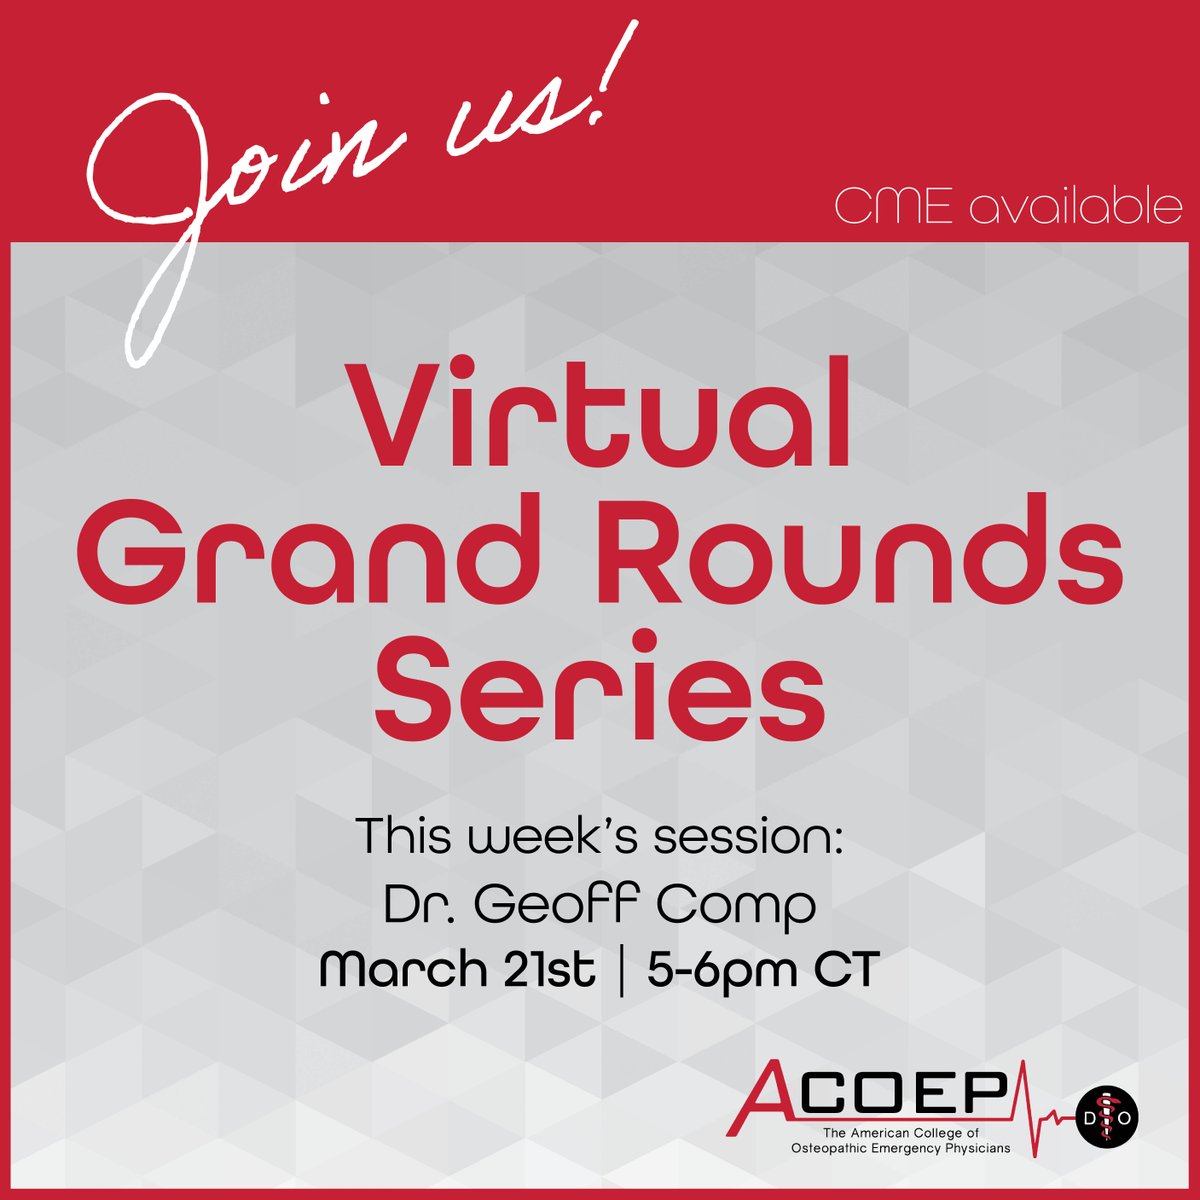 Dr. Geoff Comp live on our next Virtual Grand Rounds webinar tonight at 5pm CT. Register before 1pm to get the link to the webinar. We hope you can join us! ow.ly/xjlW50PSzBm